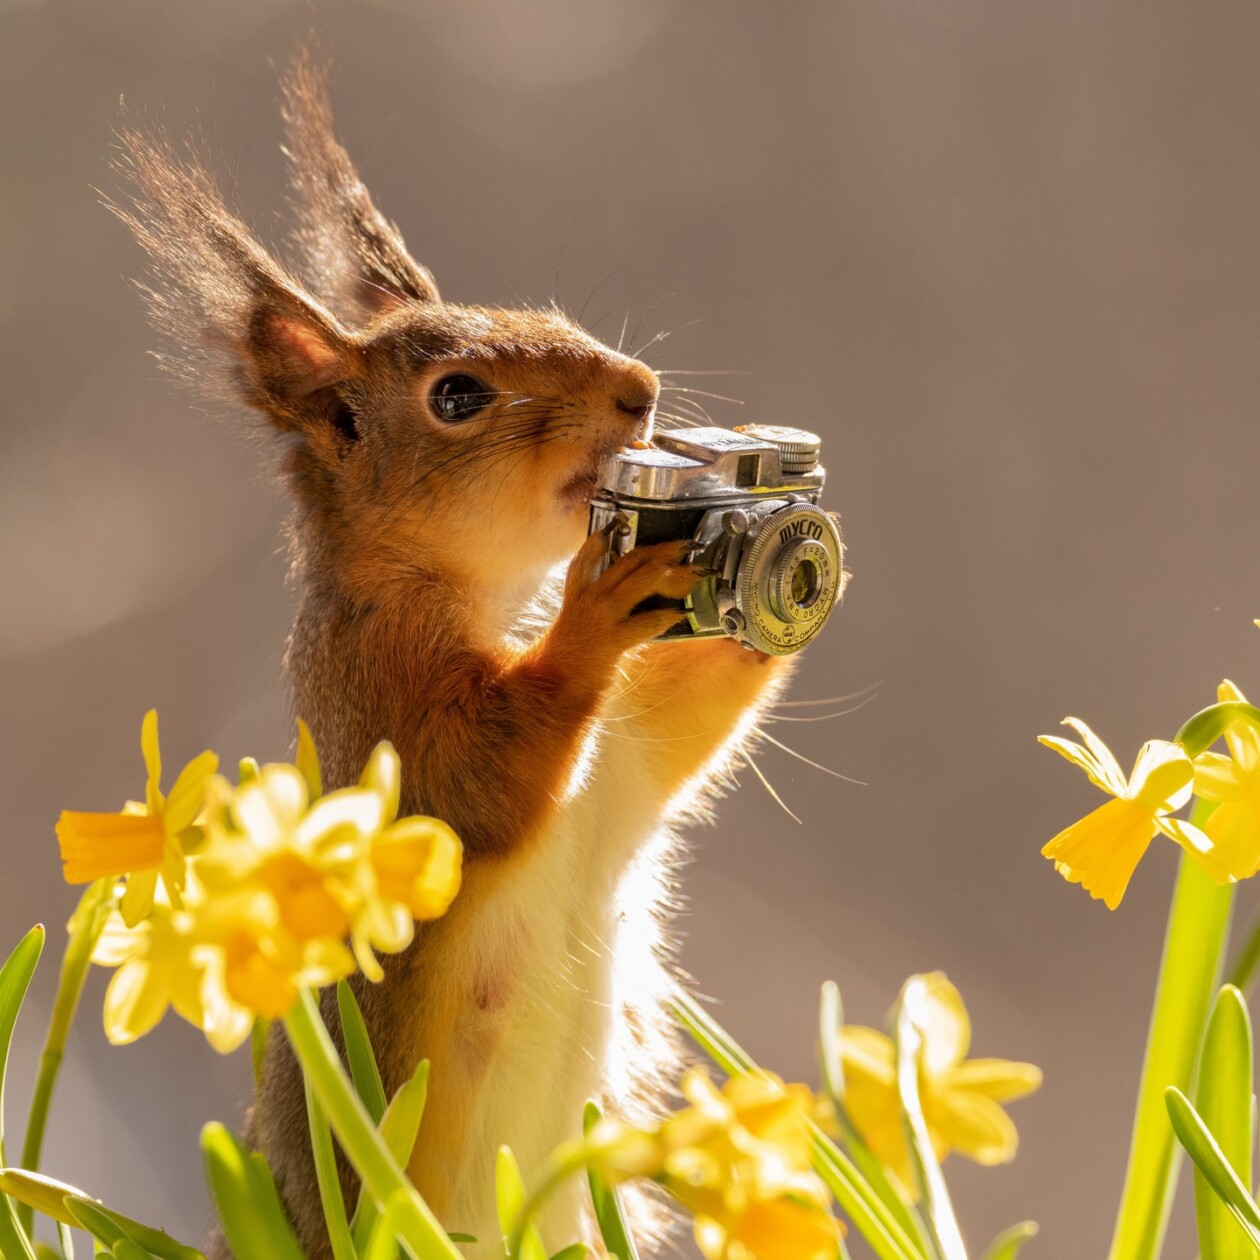 Photographer Geert Weggen Captured Lovely And Playful Pictures Of Squirrels In Action (5)